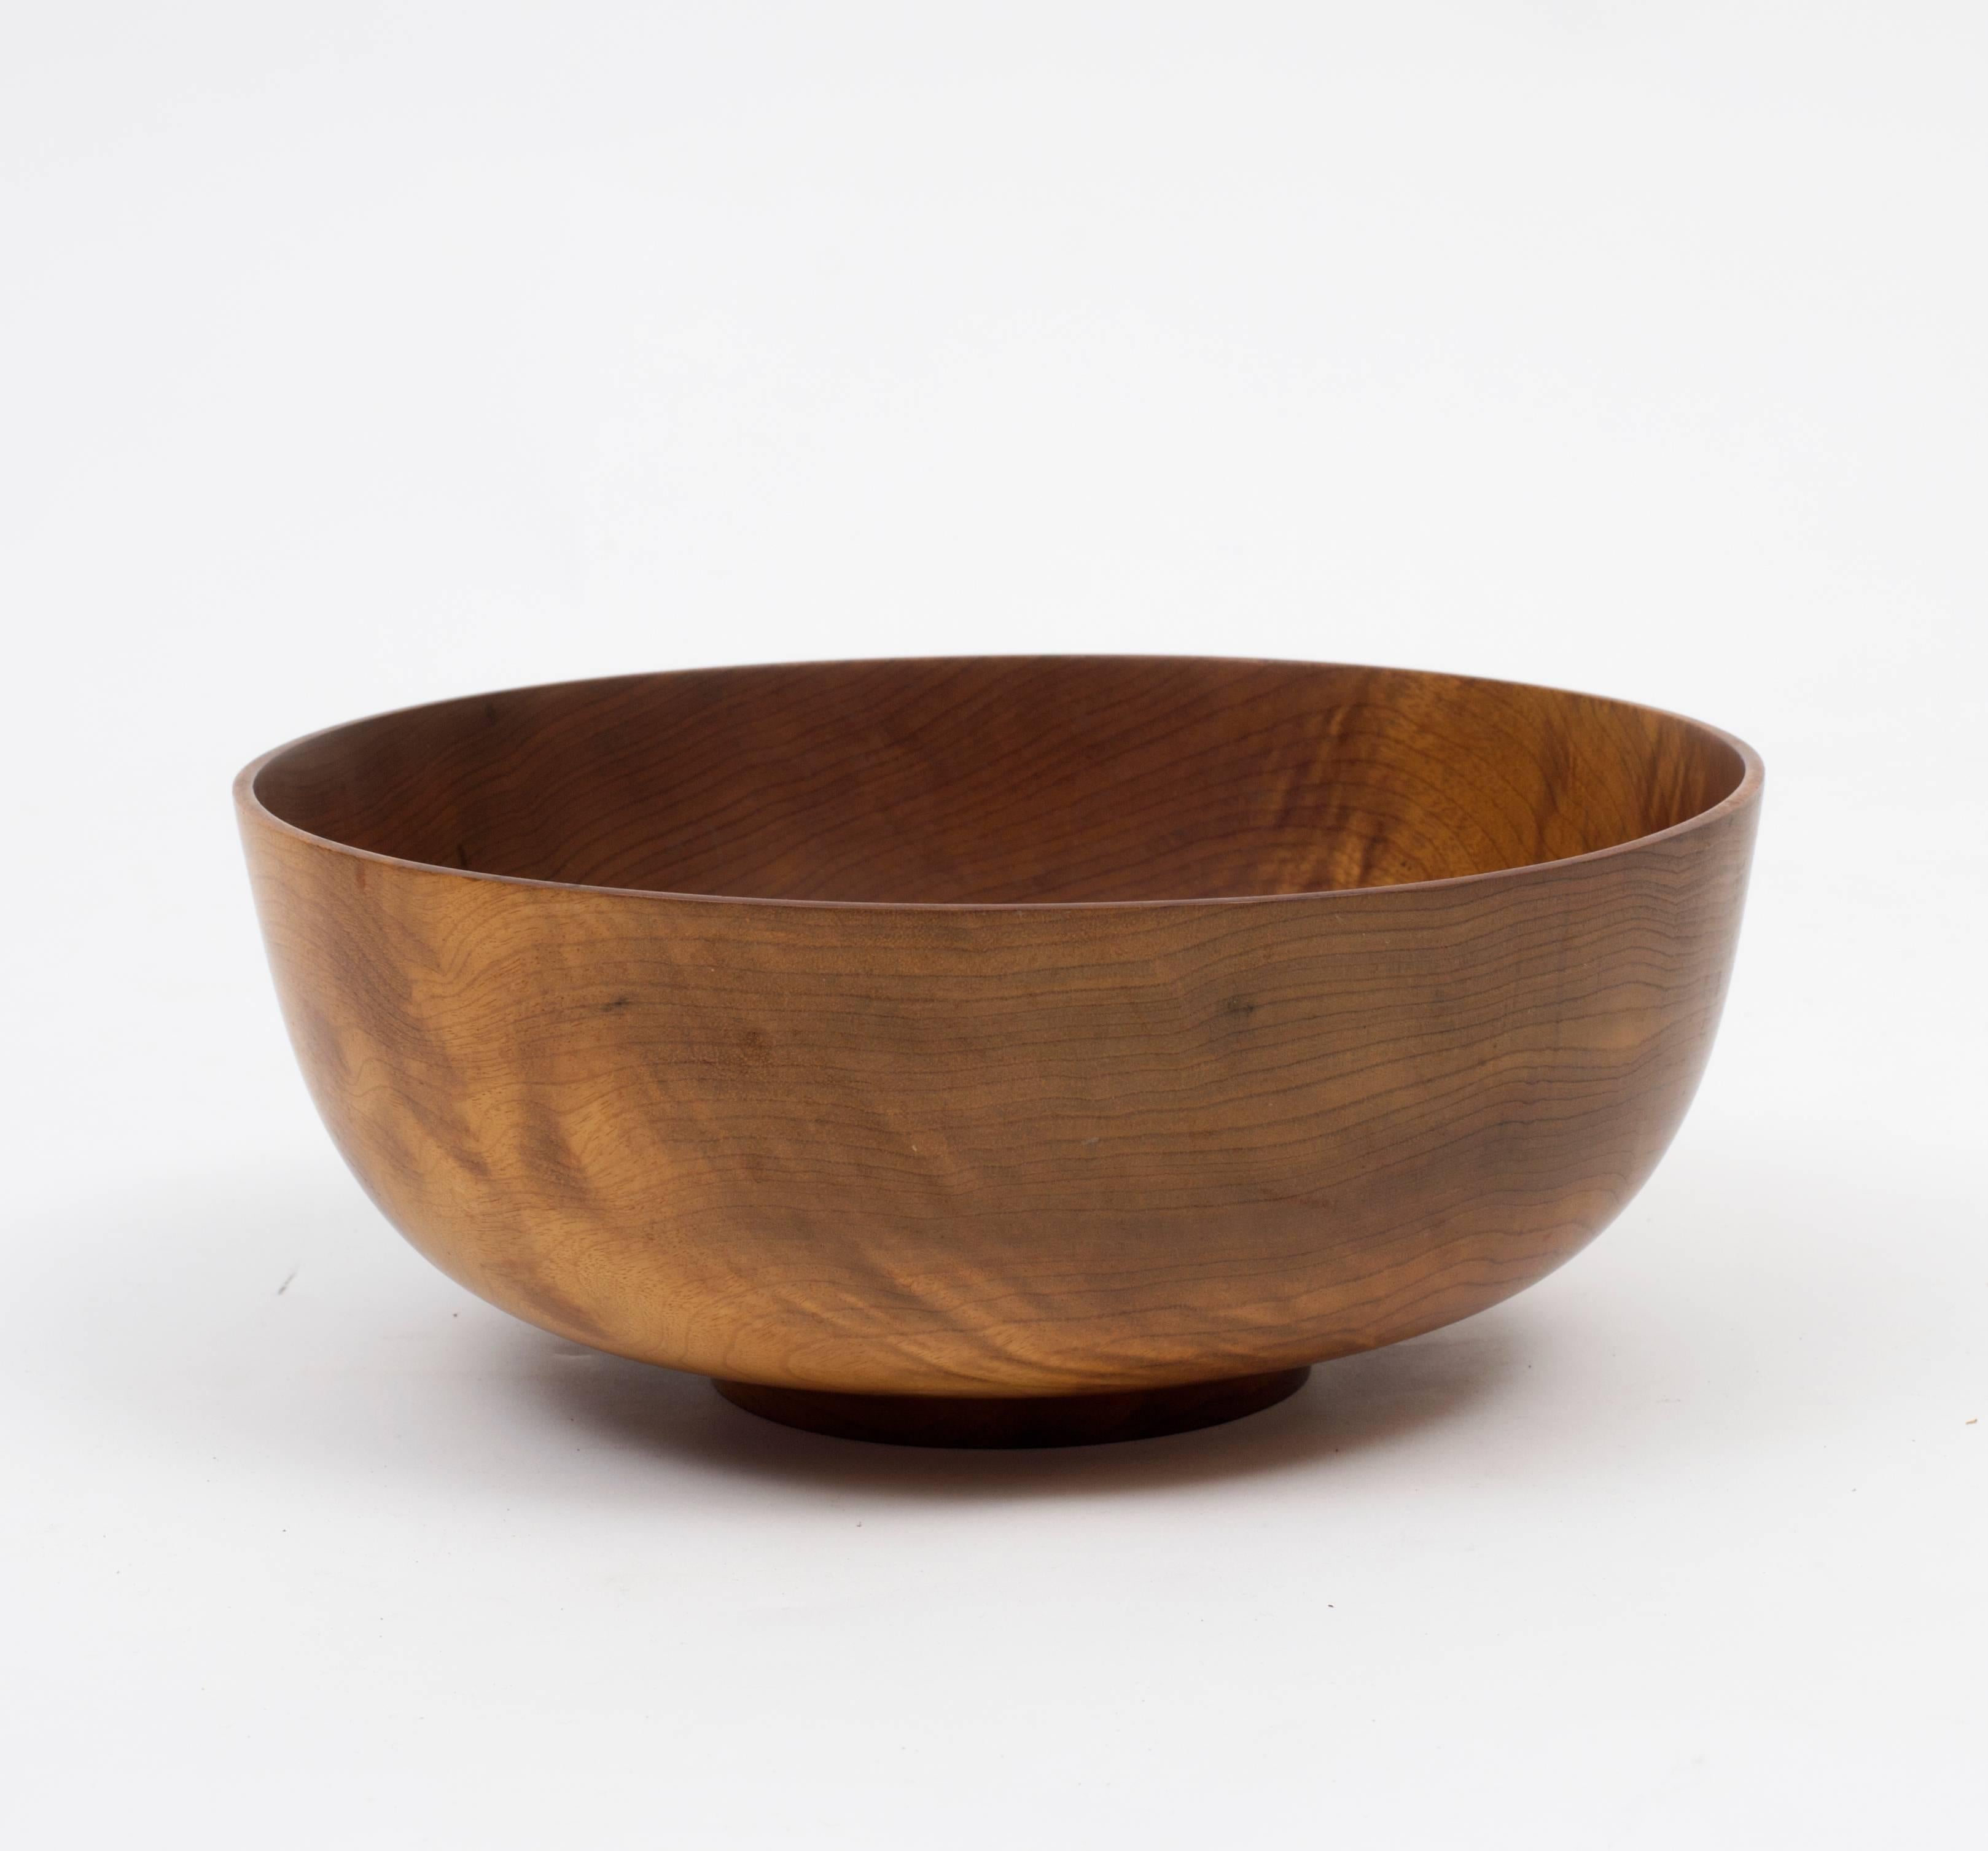 Beautiful wood turned bowl by wood working and wood tool Pioneer Jerry Glaser.